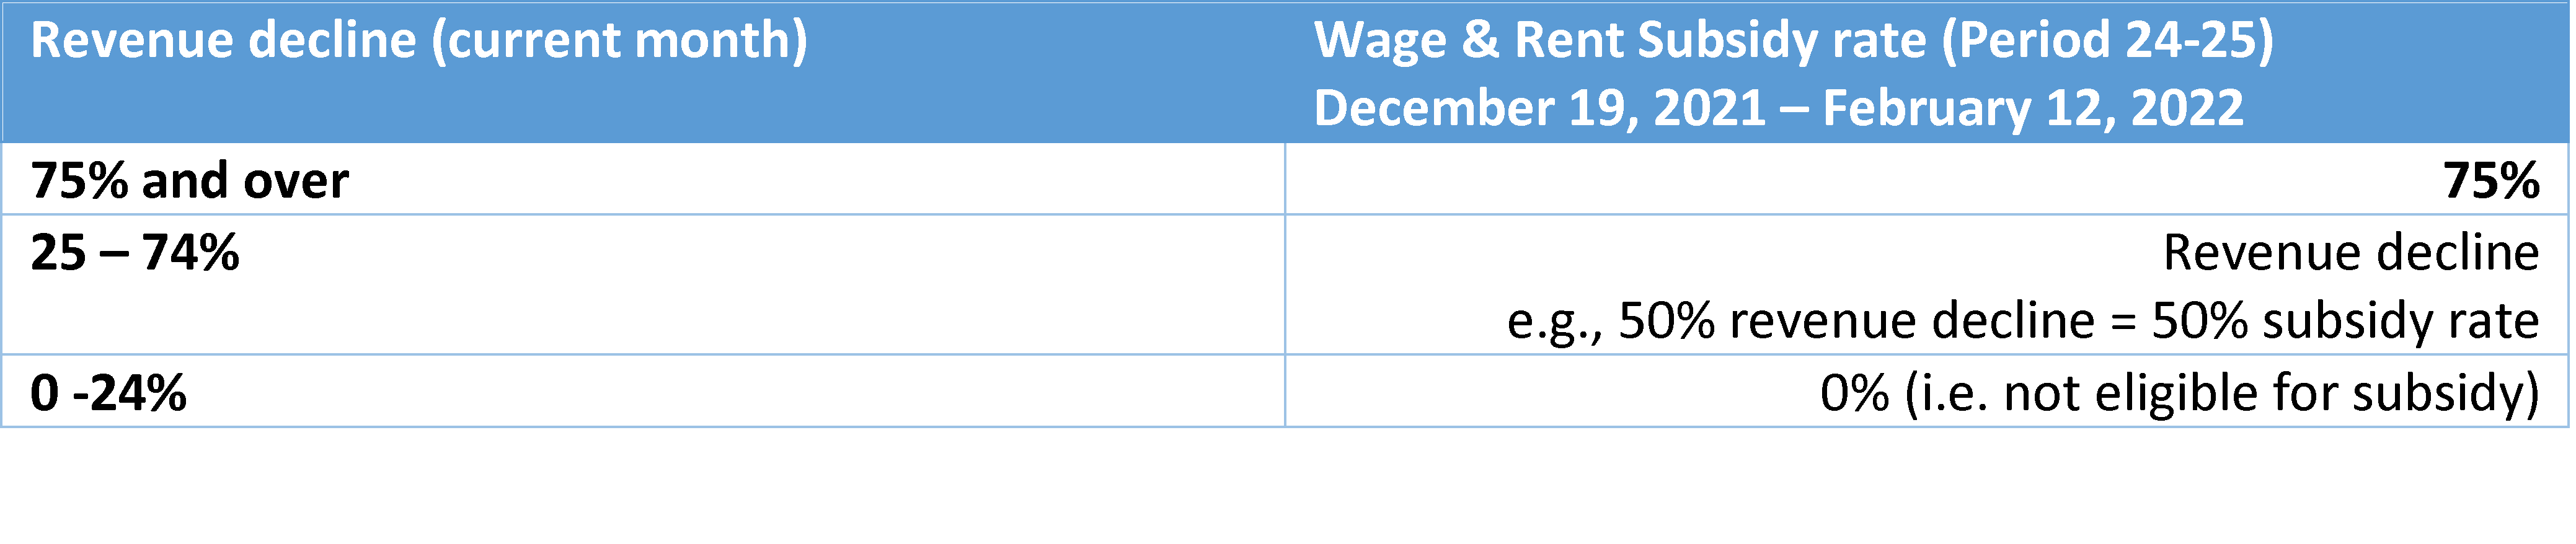 Wage & Rent Subsidy rate (Period 24-25) 